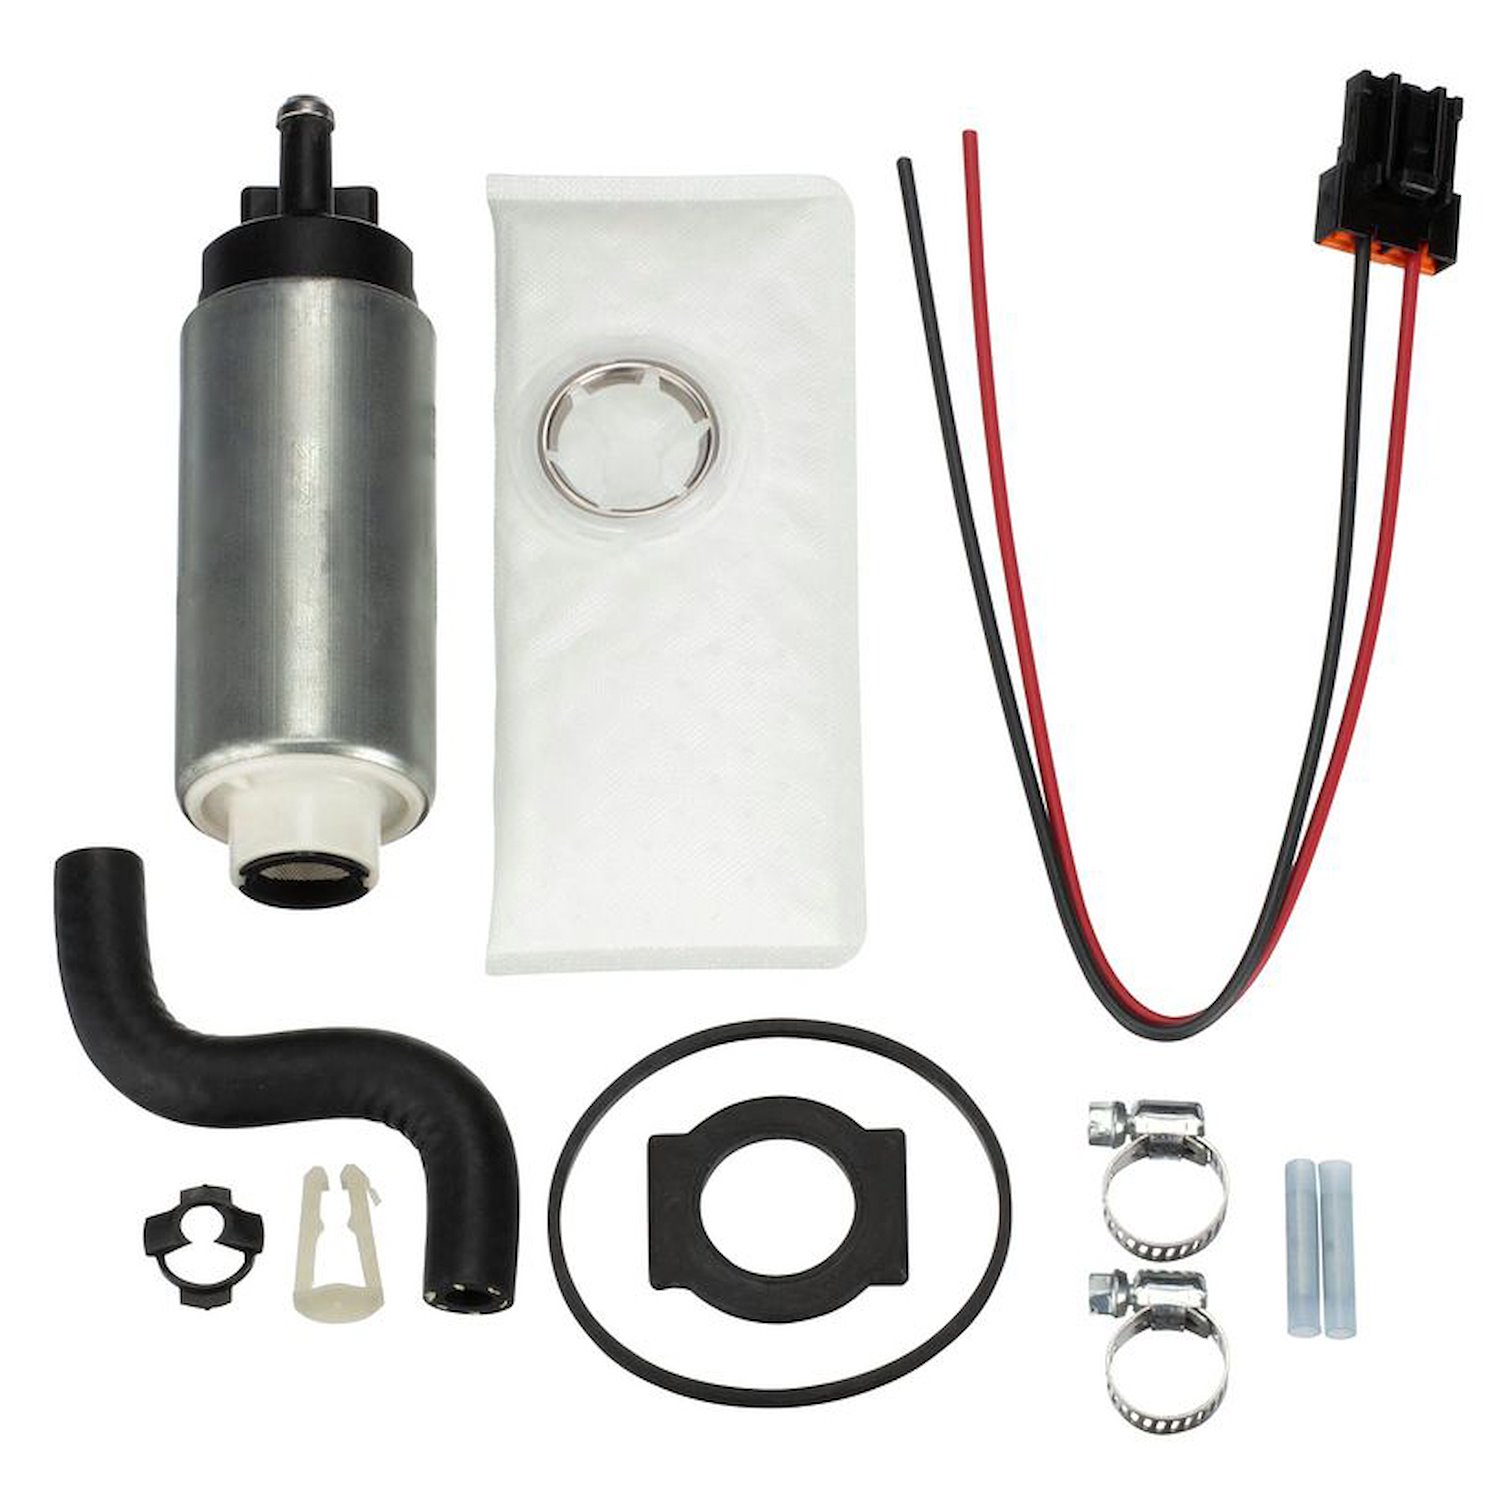 EFI In-Tank Electric Fuel Pump And Strainer Set for 1985-1996 Ford Mustang